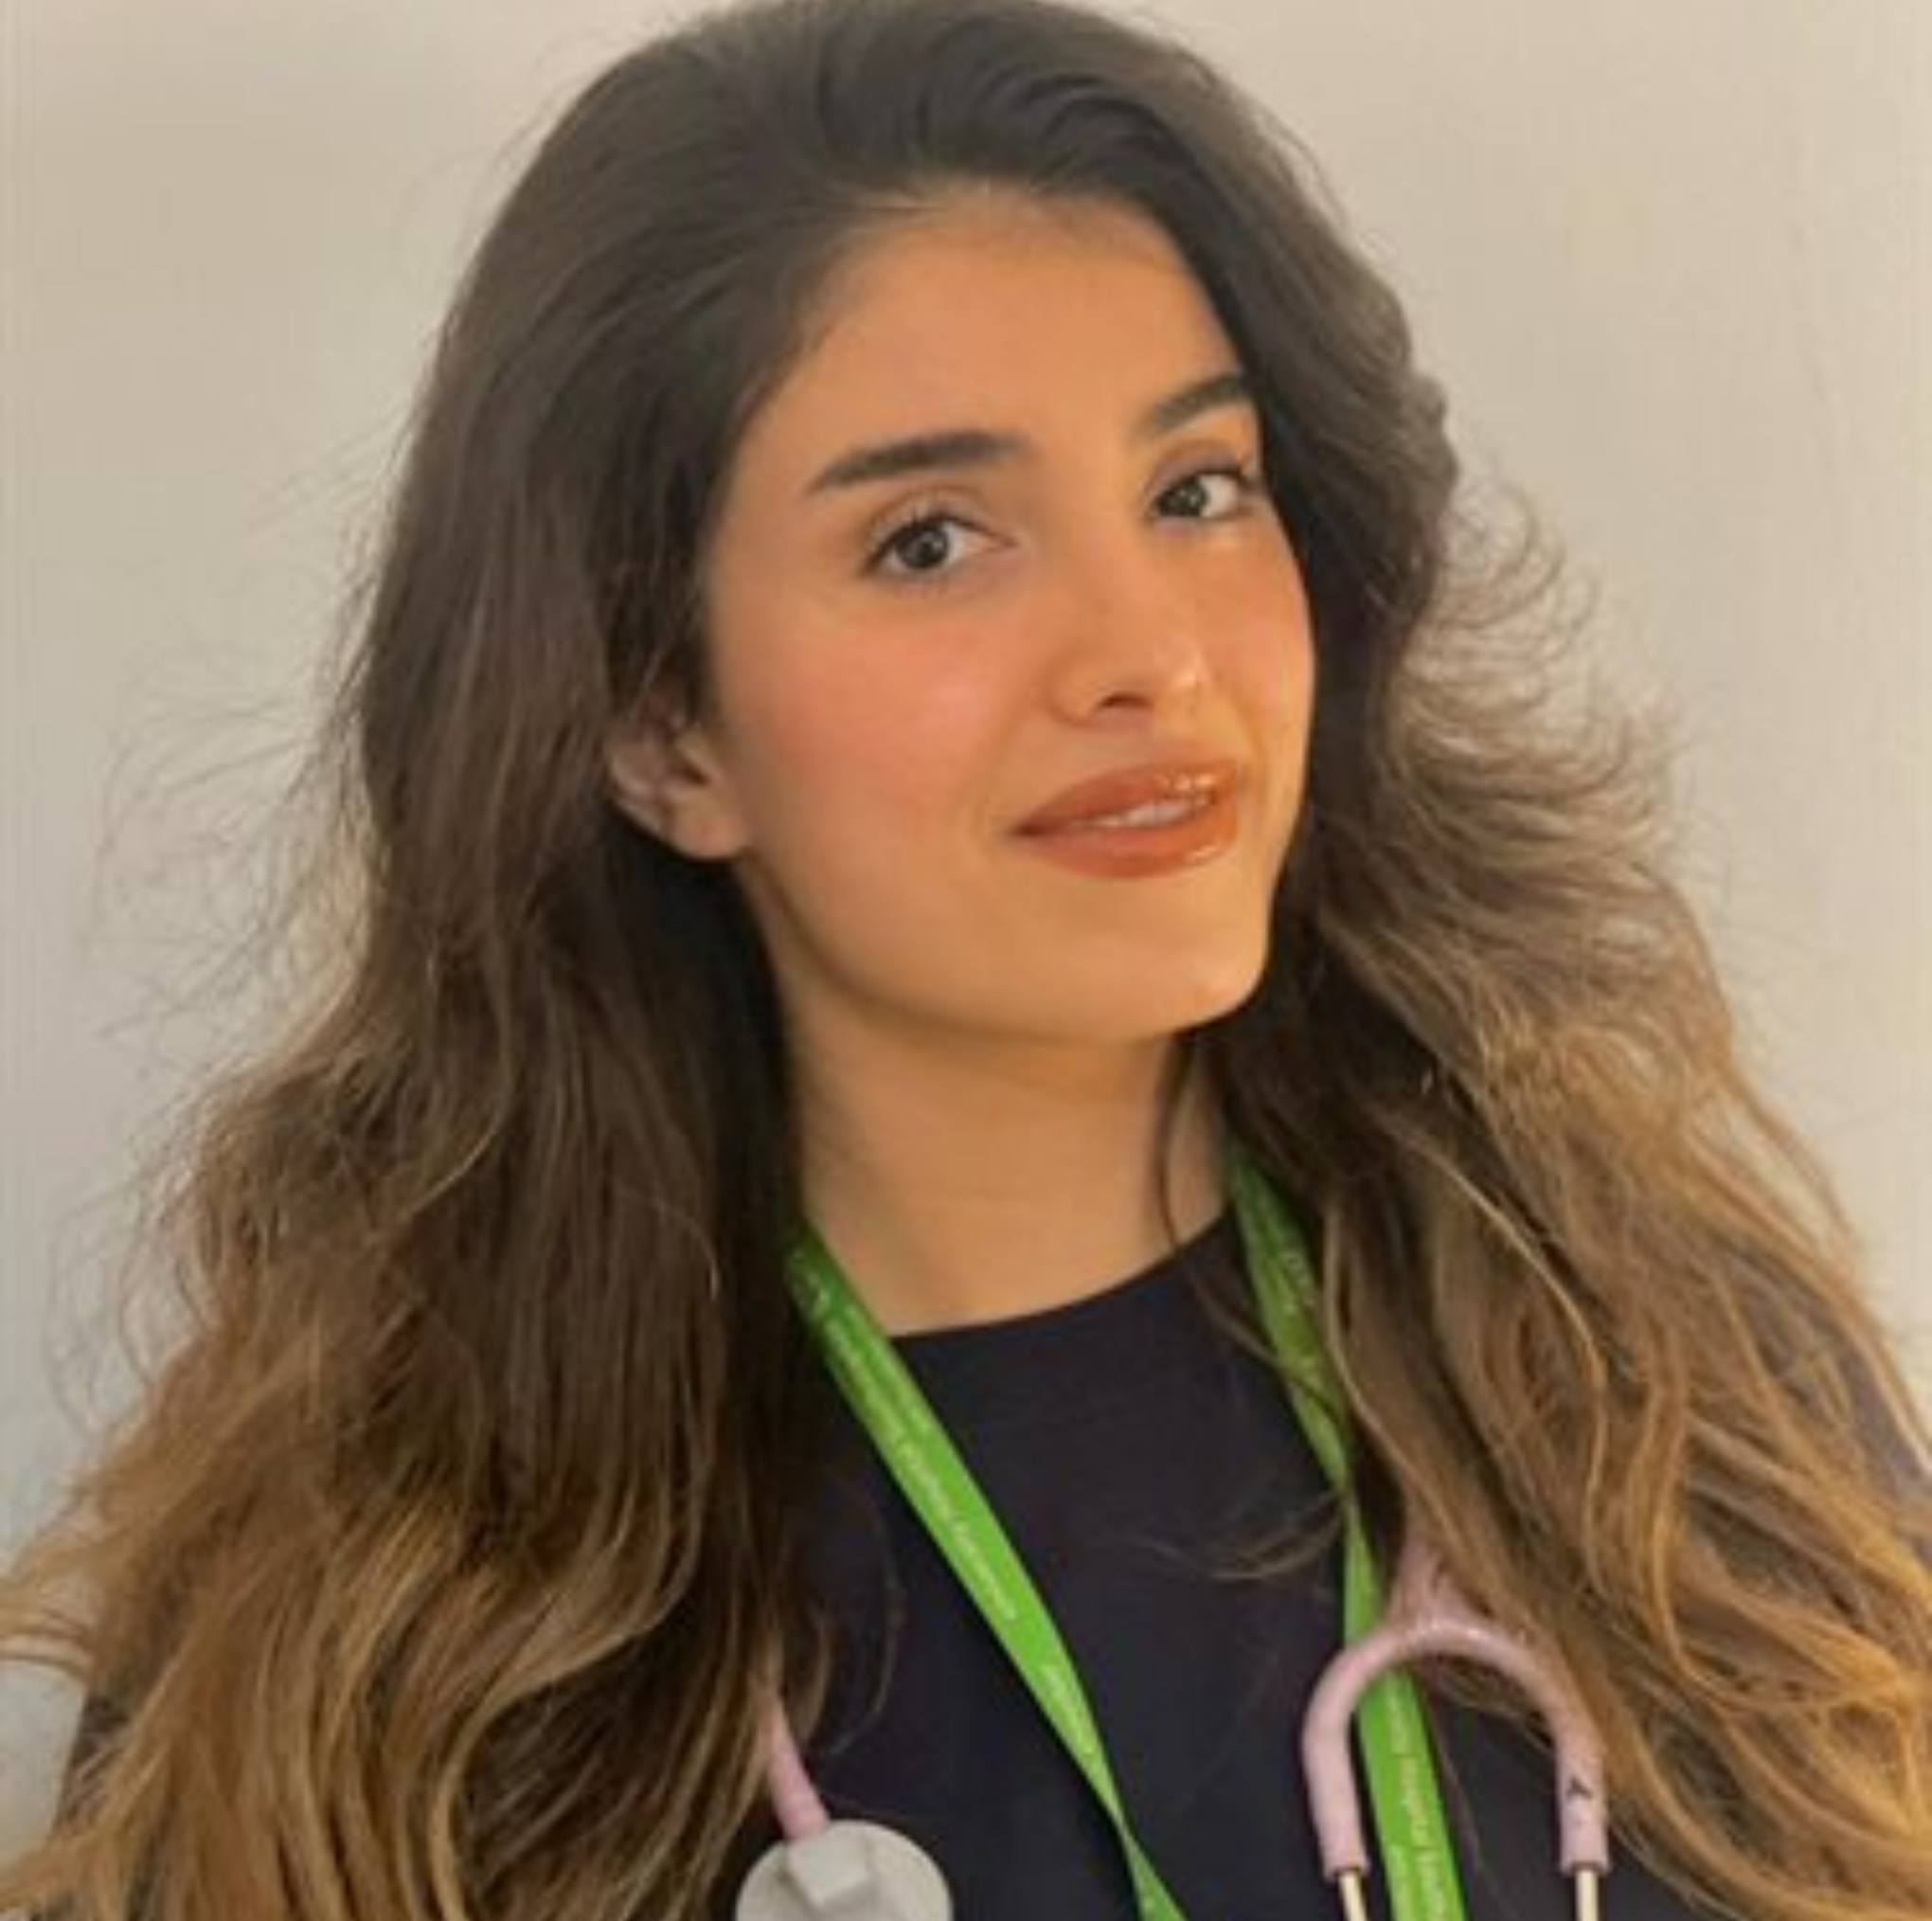 A young female healthcare professional with long, wavy brown hair wearing a stethoscope around her neck and a lanyard, smiling gently at the camera.